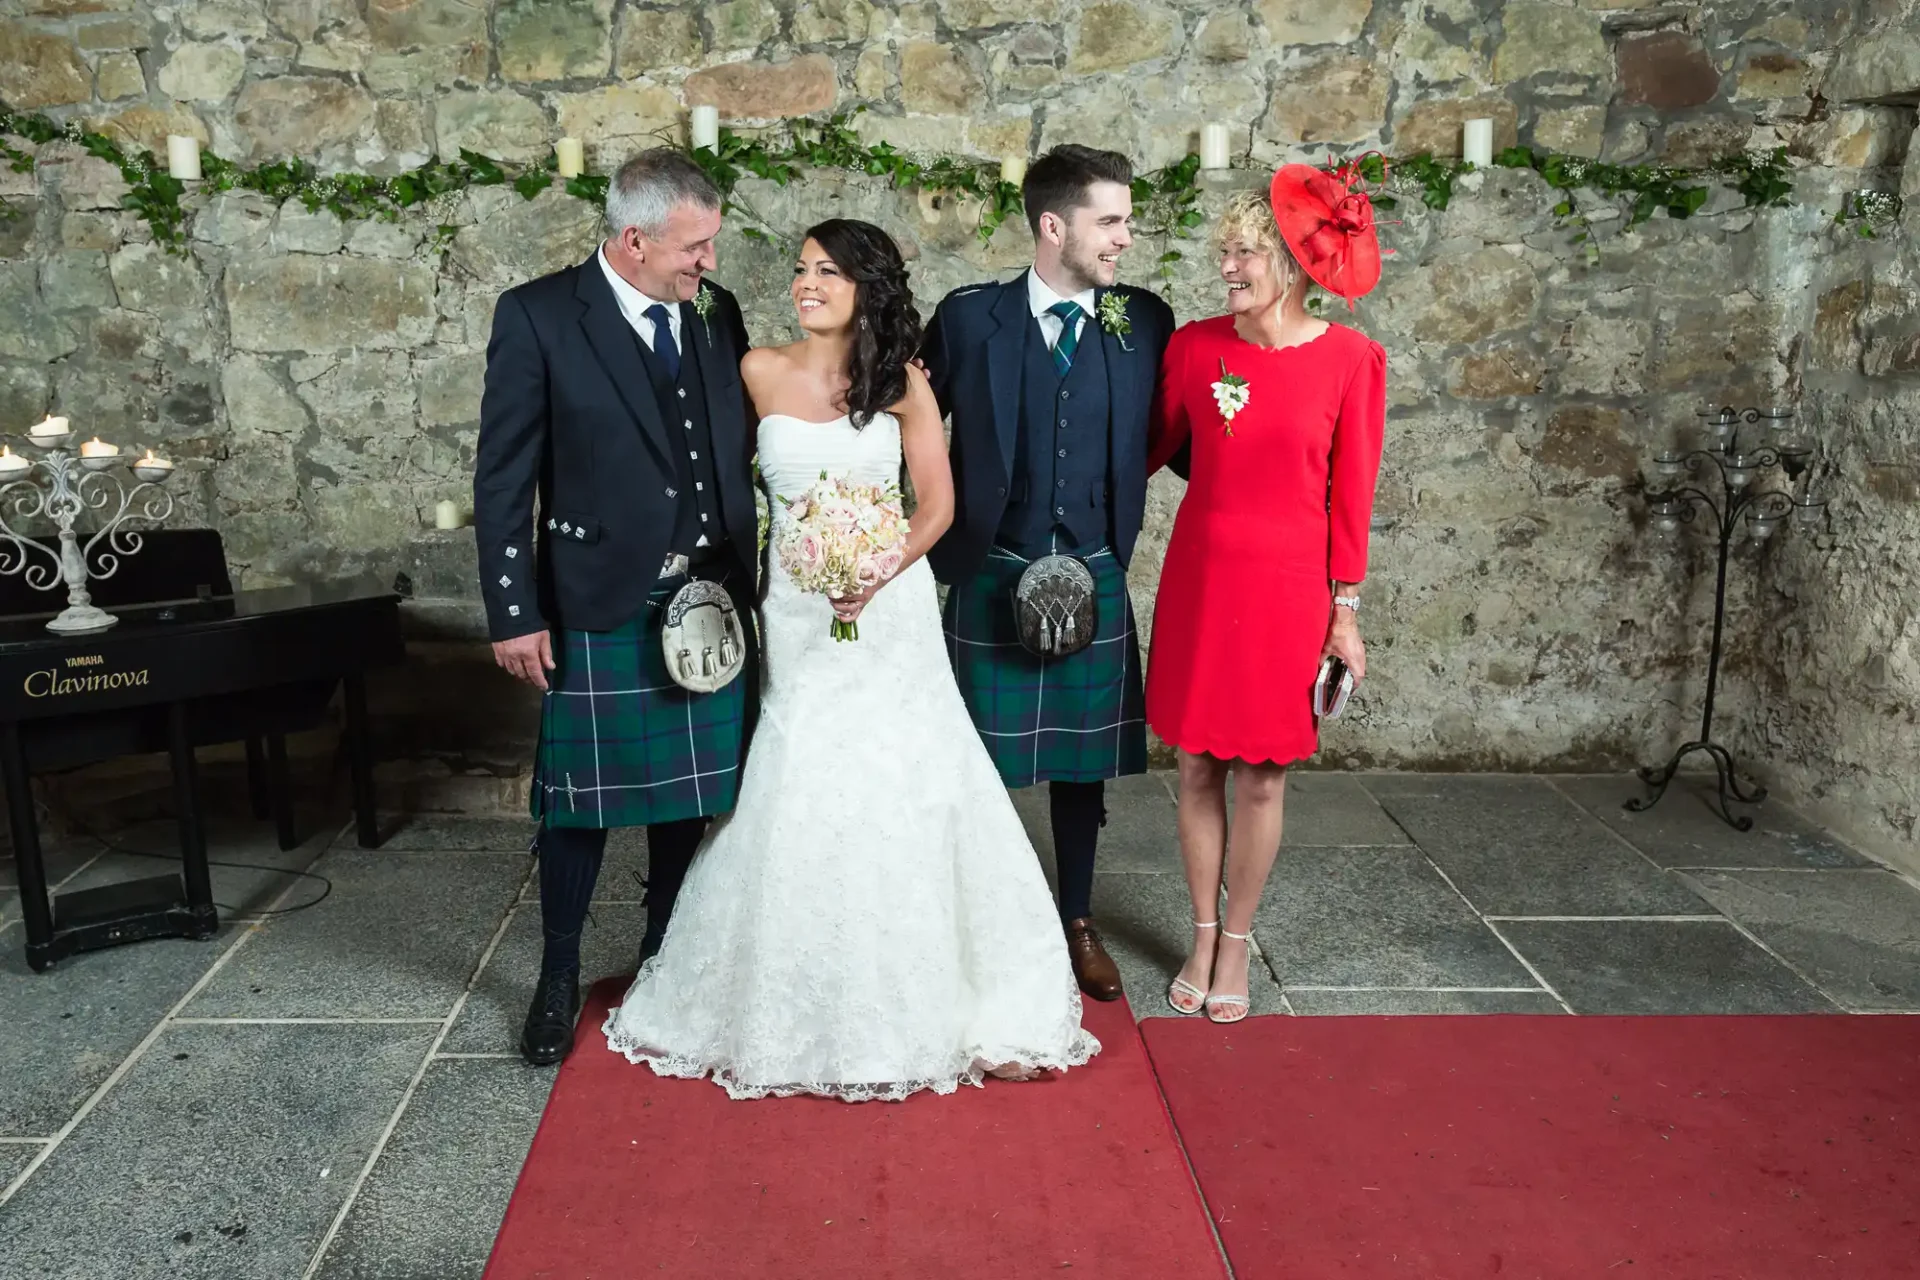 A bride and groom stand with two guests at their wedding in a stone-walled hall, the men in traditional kilts and the women in dresses.